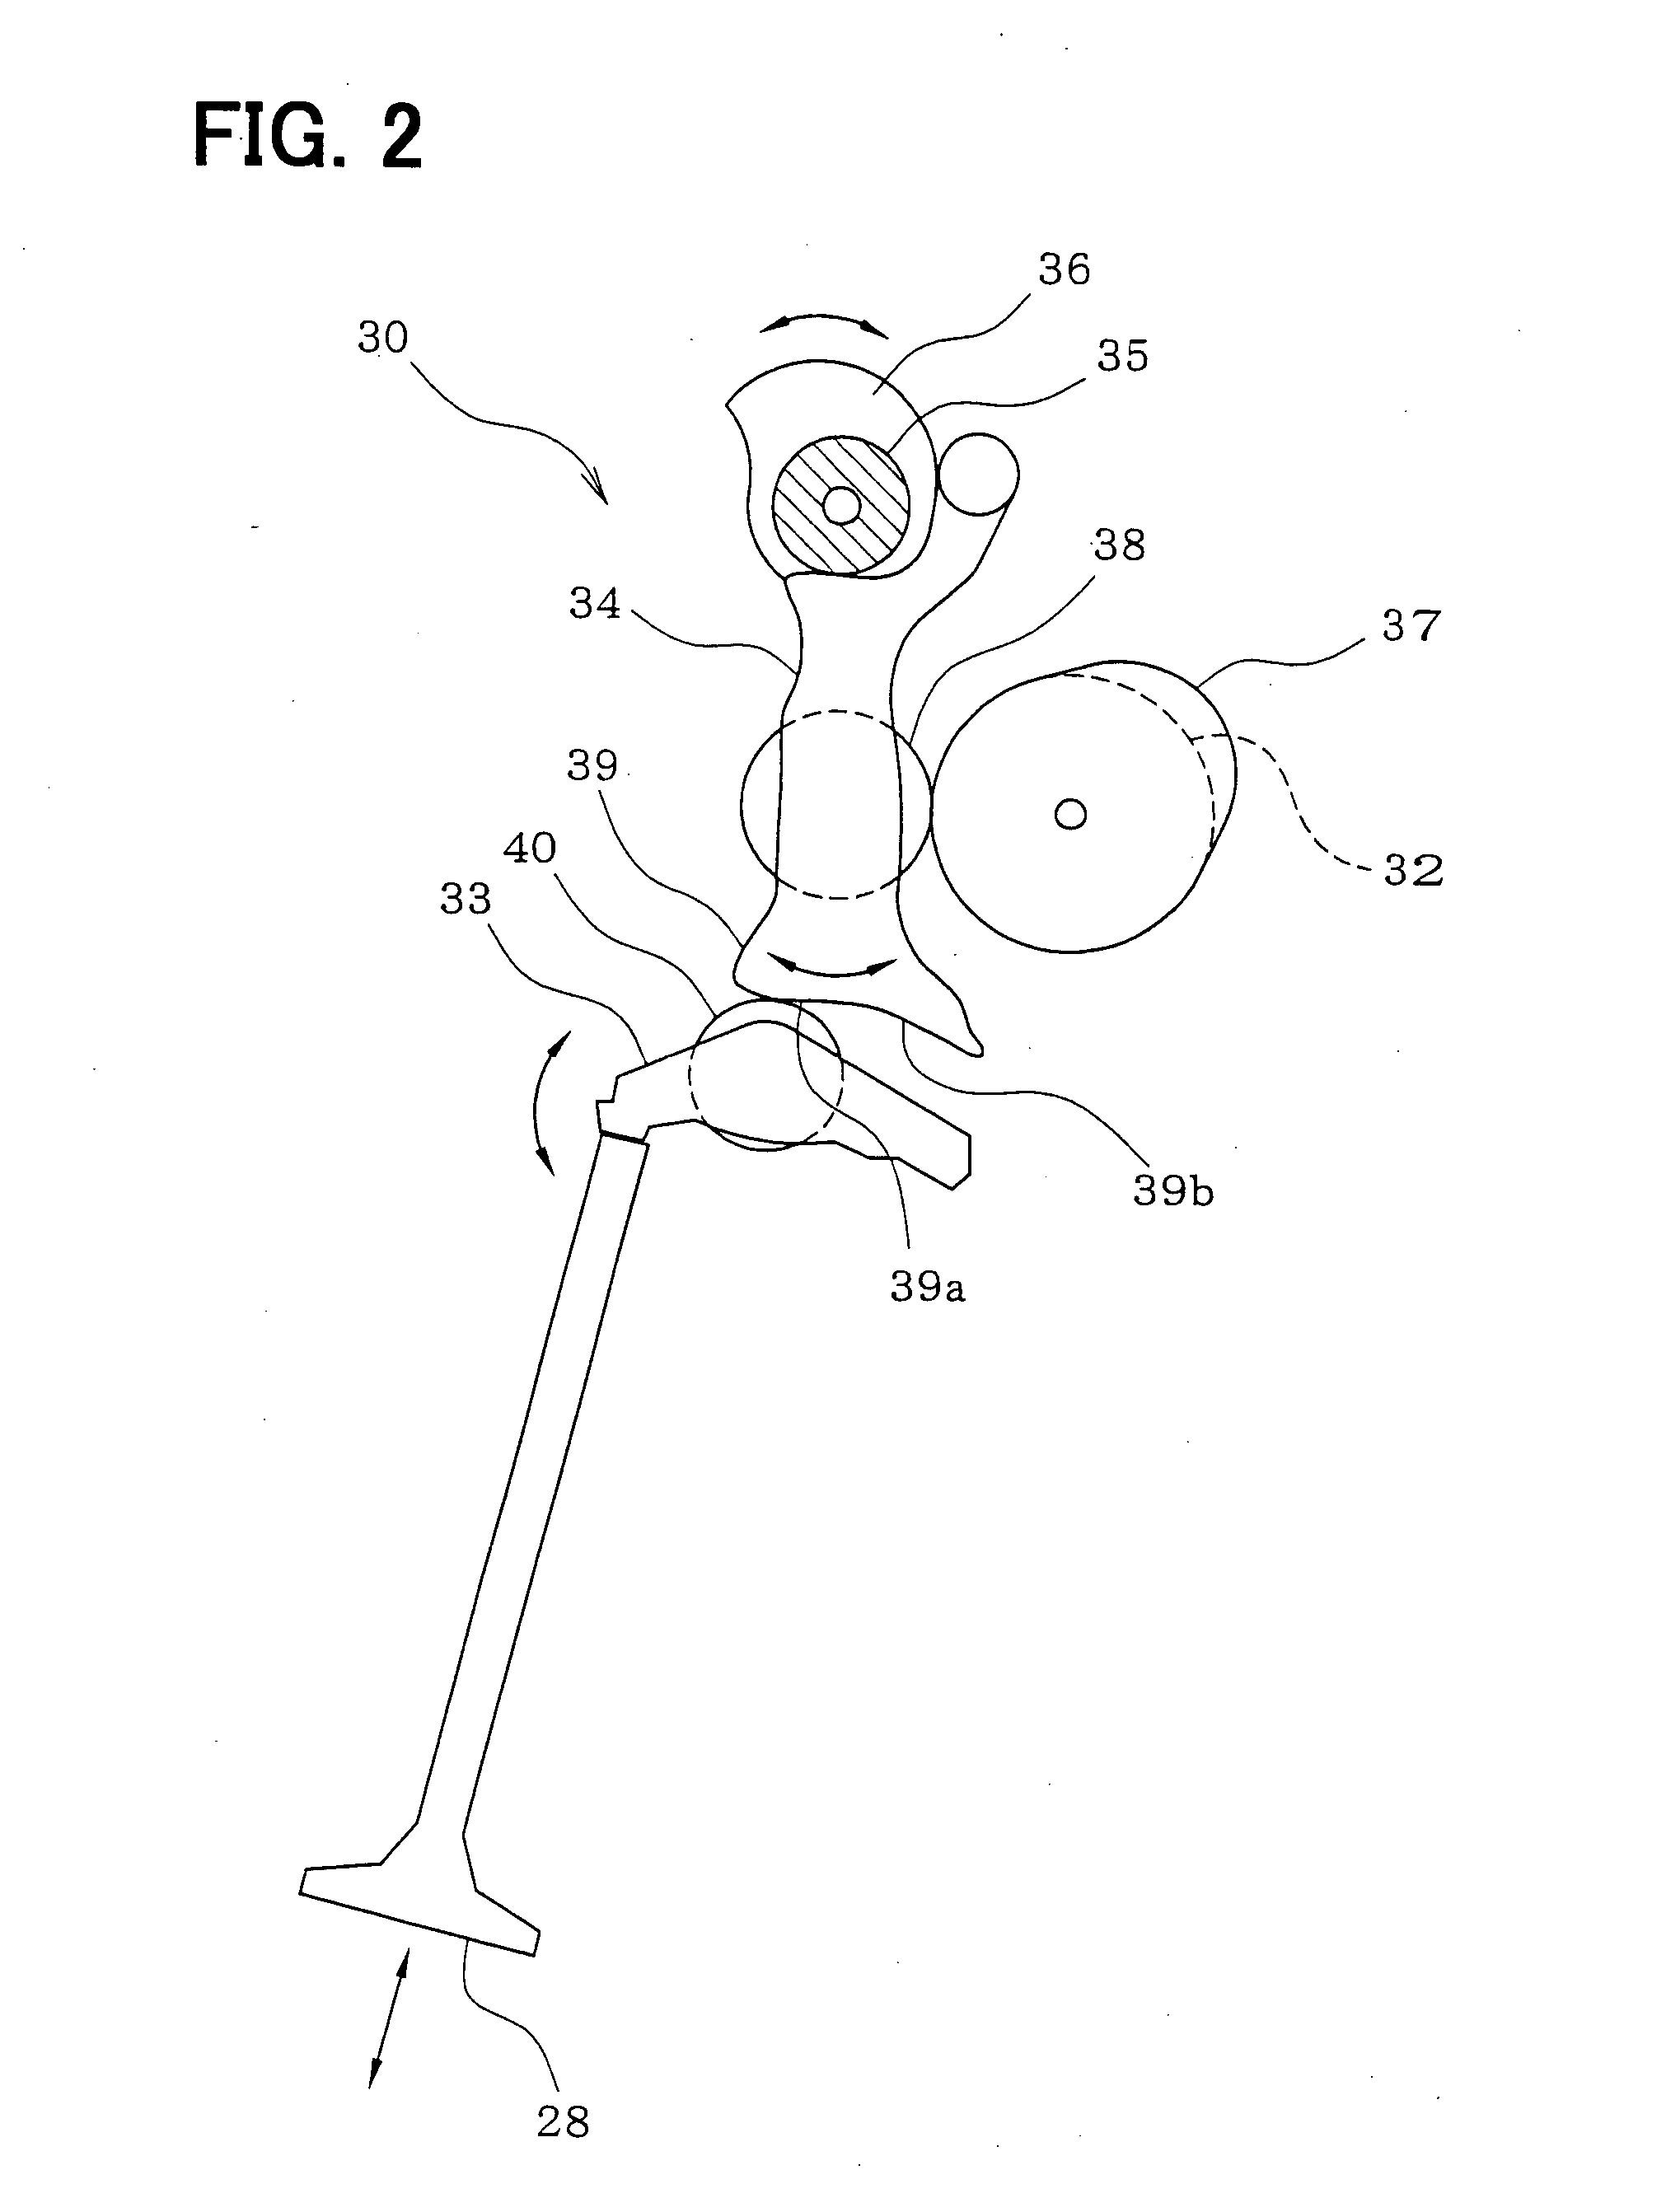 Apparatus for controlling engine